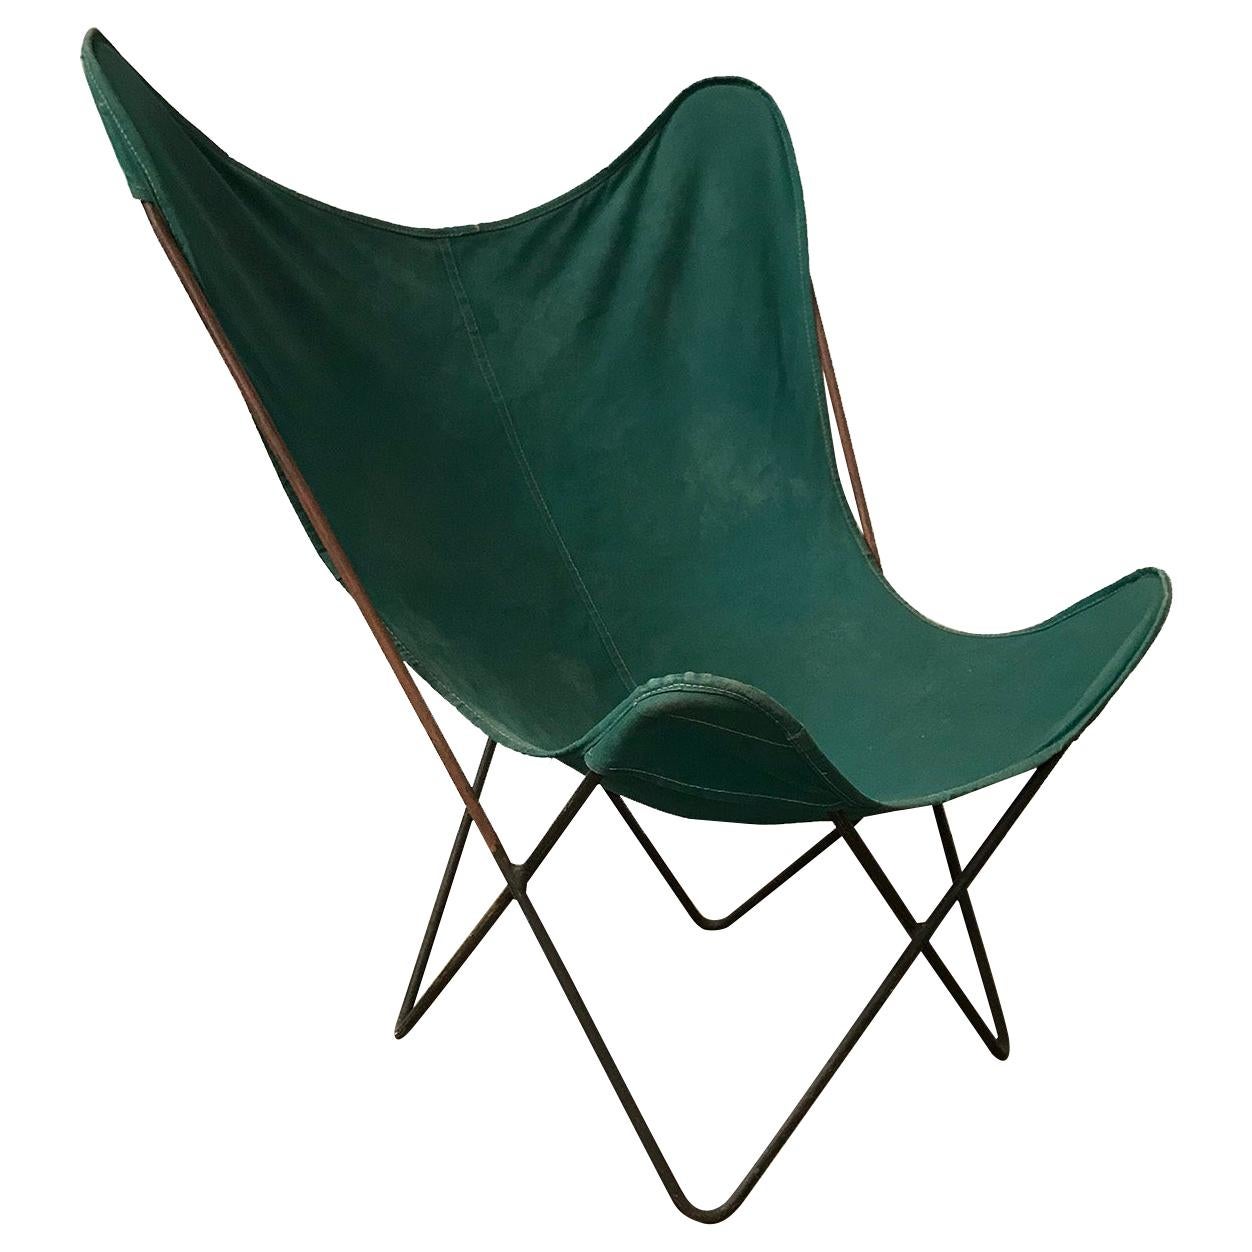 1947, Hardoy, Ferrari, Green Cover with Grey Base Butterfly Chair